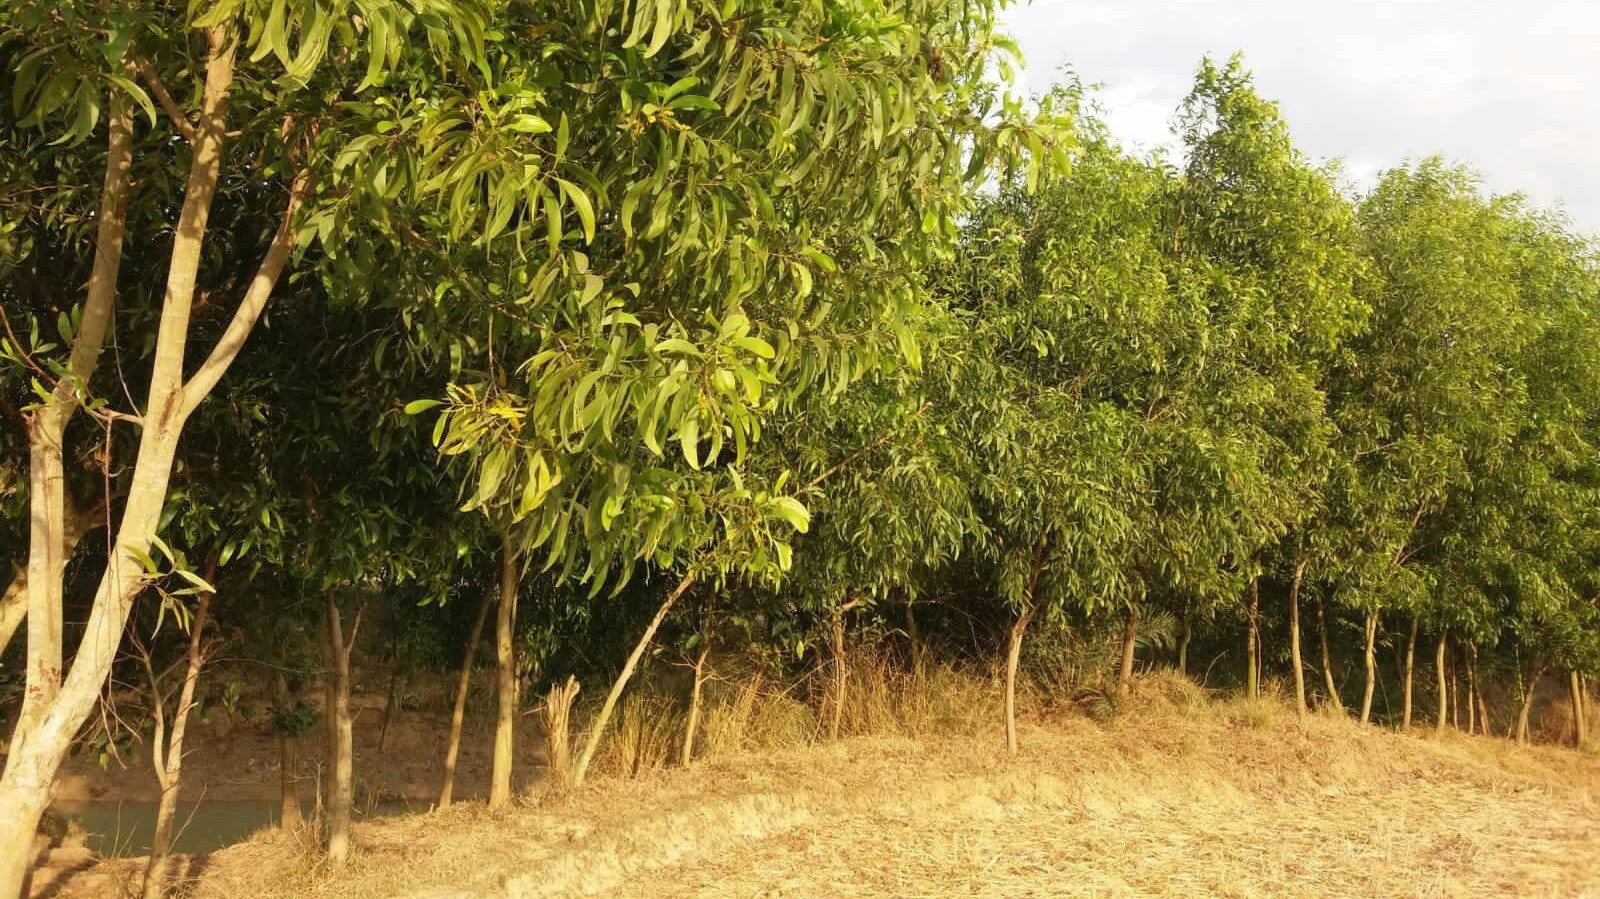 Social afforestation benefits people immensely in Rajshahi